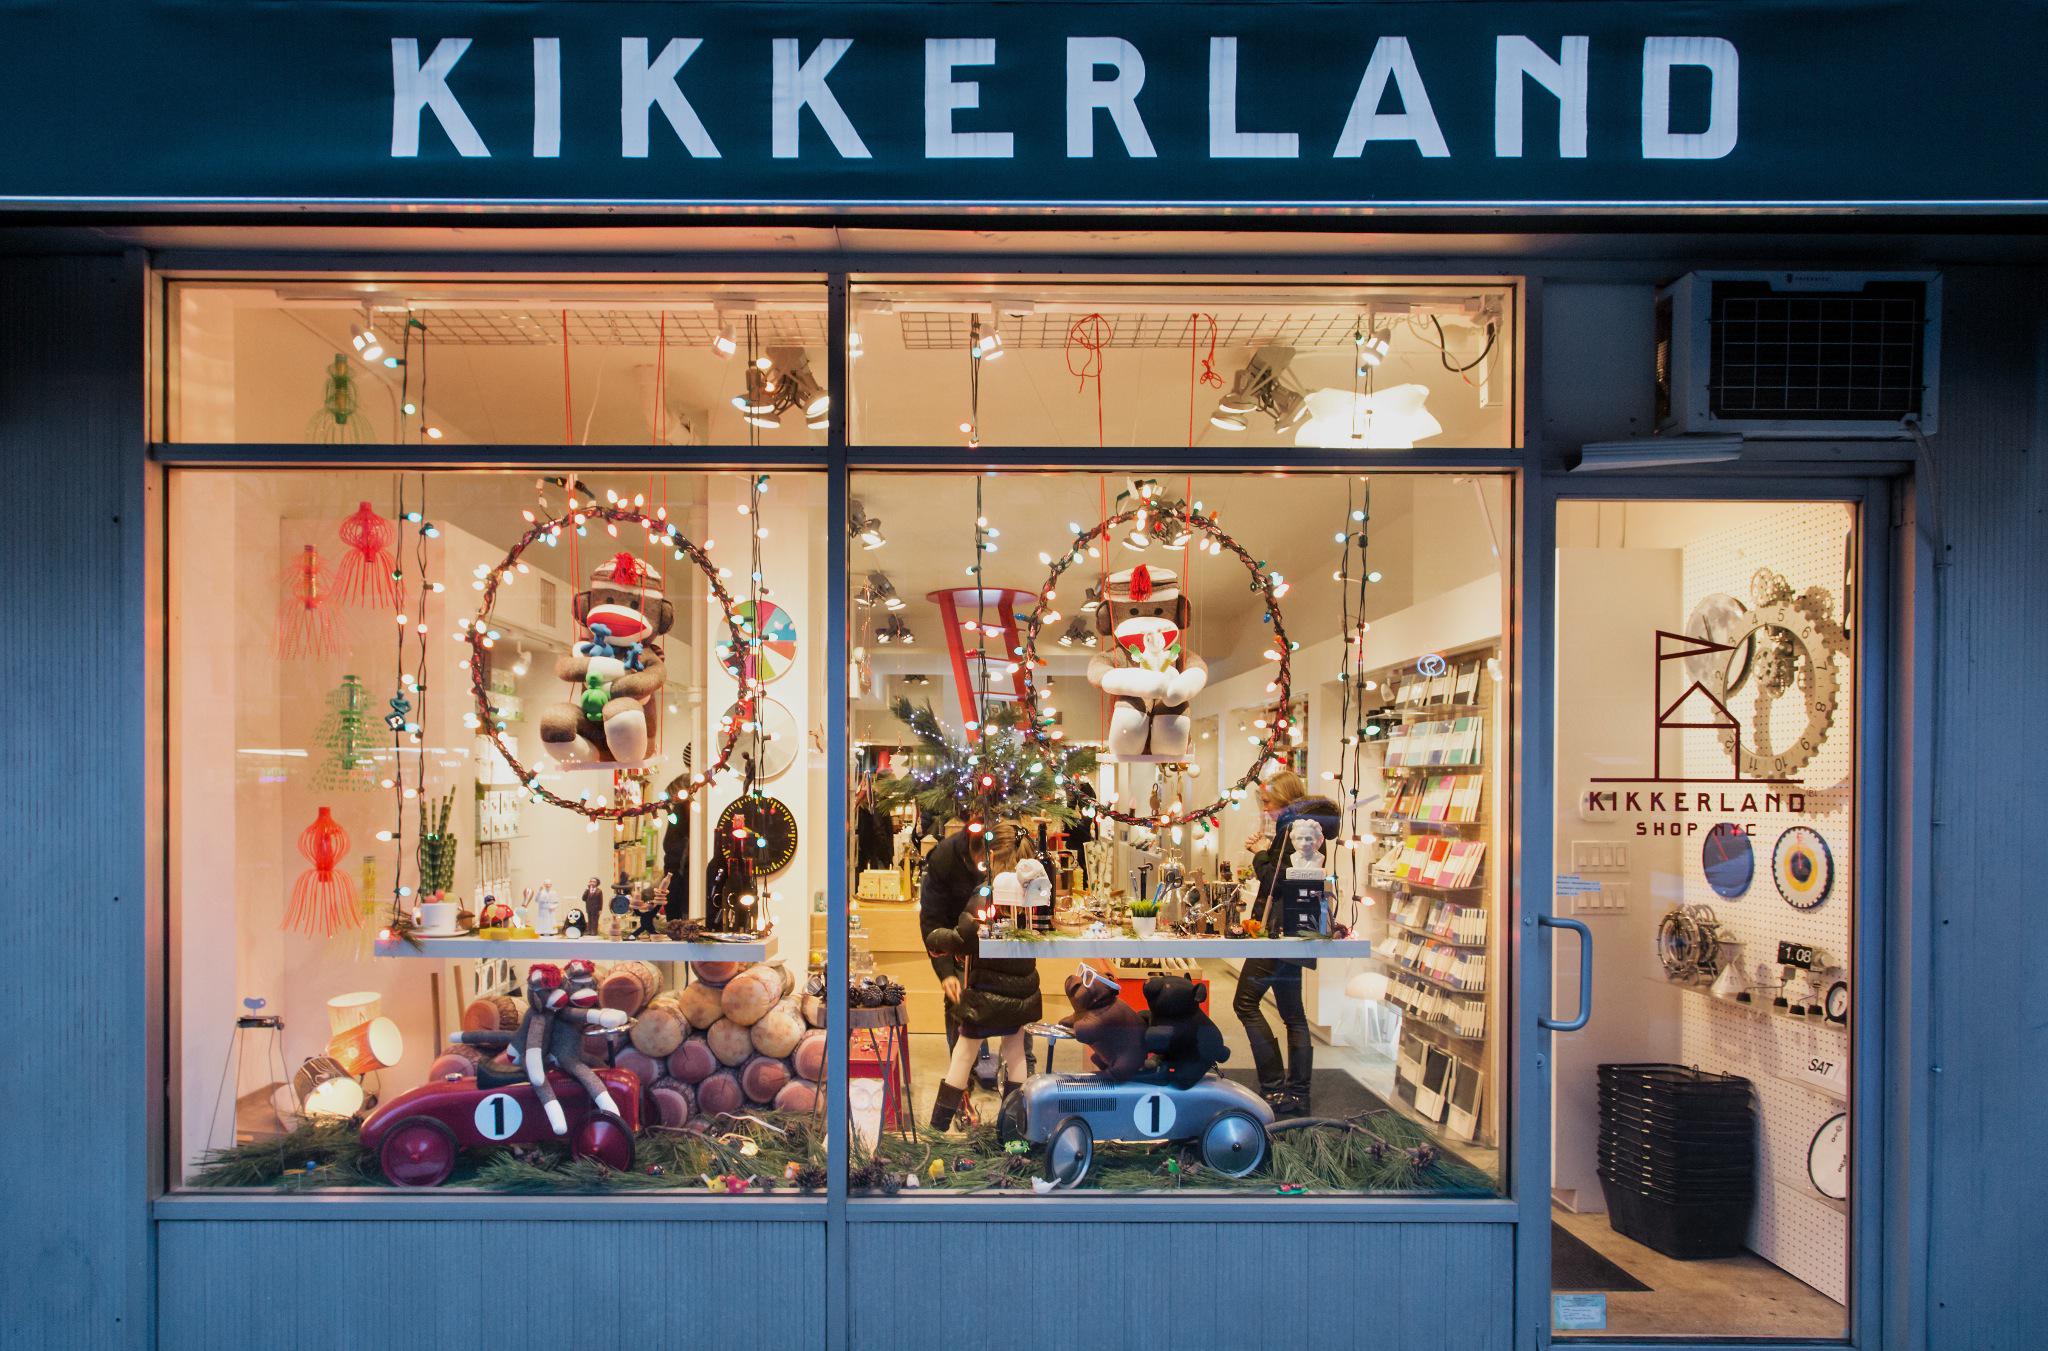 Kikkerland Design on Twitter: "The #Kikkerland #Design Shop #NYC Holiday  Window Is Up - http://t.co/A6hSVpPGpj @ 493 6TH Ave NYC  http://t.co/UpuVjbYz9U" / Twitter